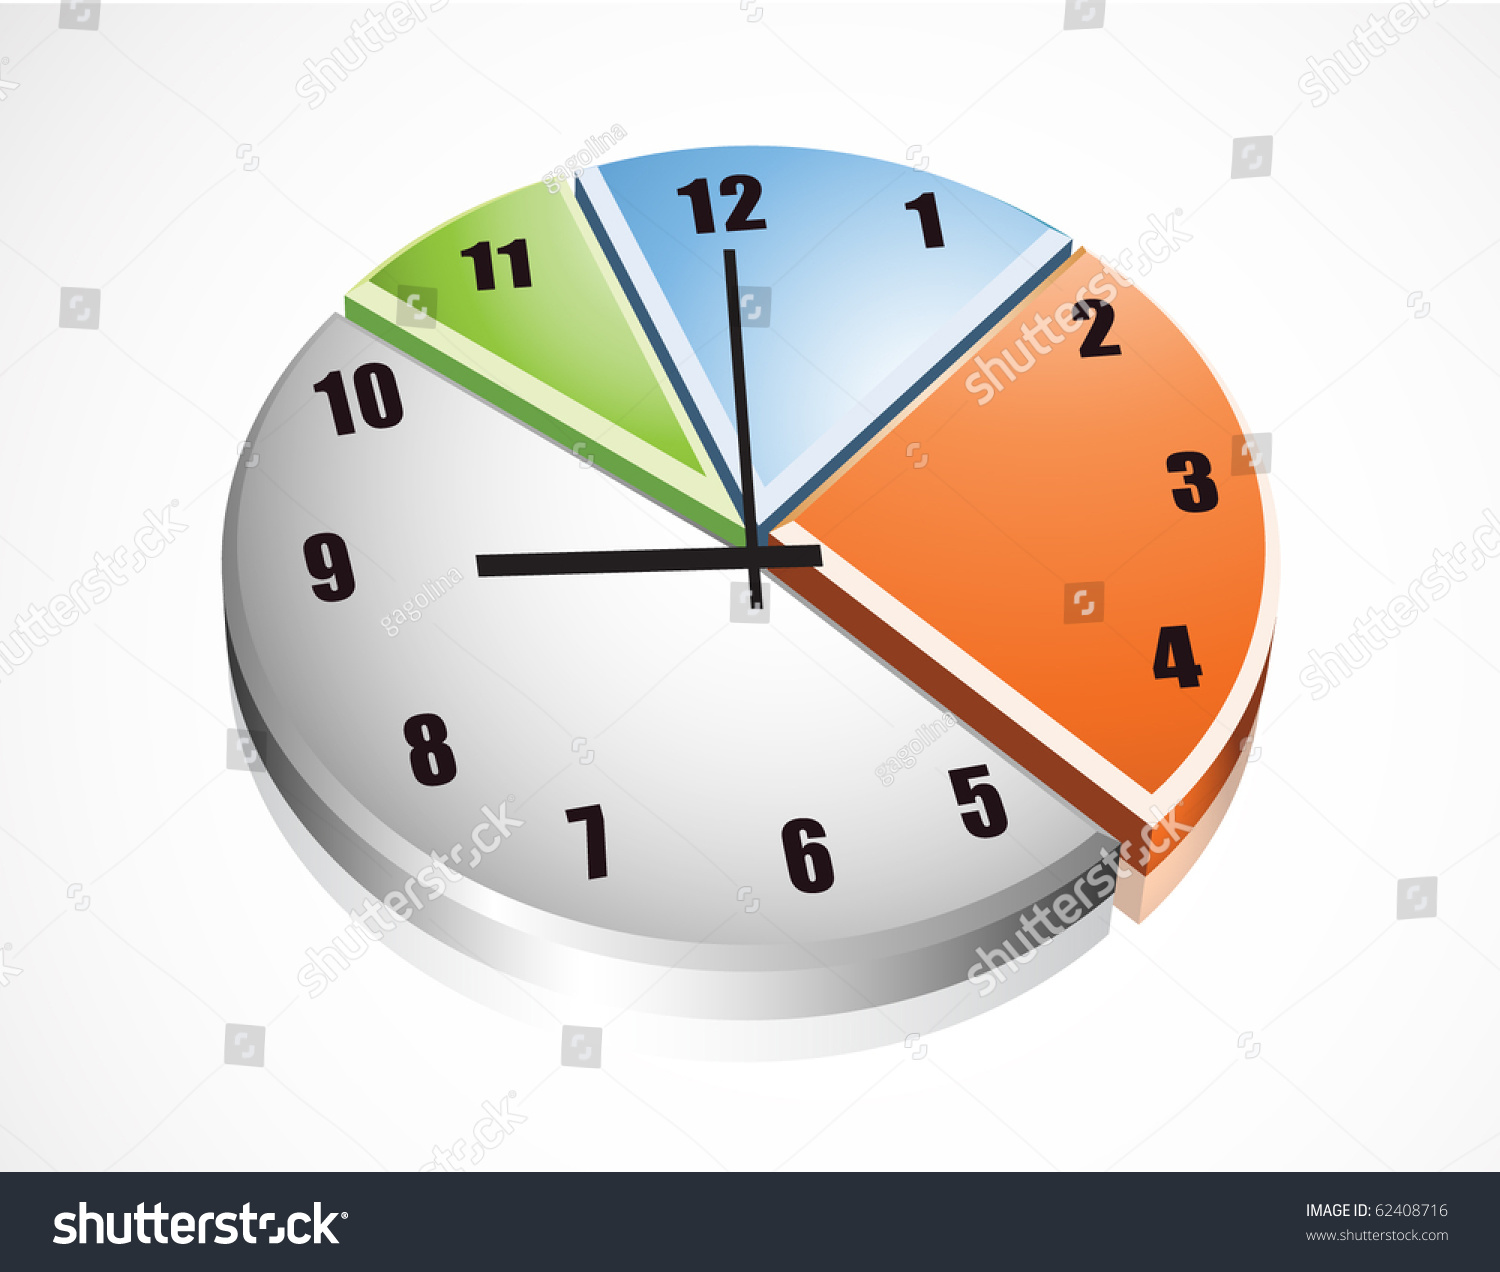 pie-graph-with-clock-stock-vector-illustration-62408716-shutterstock